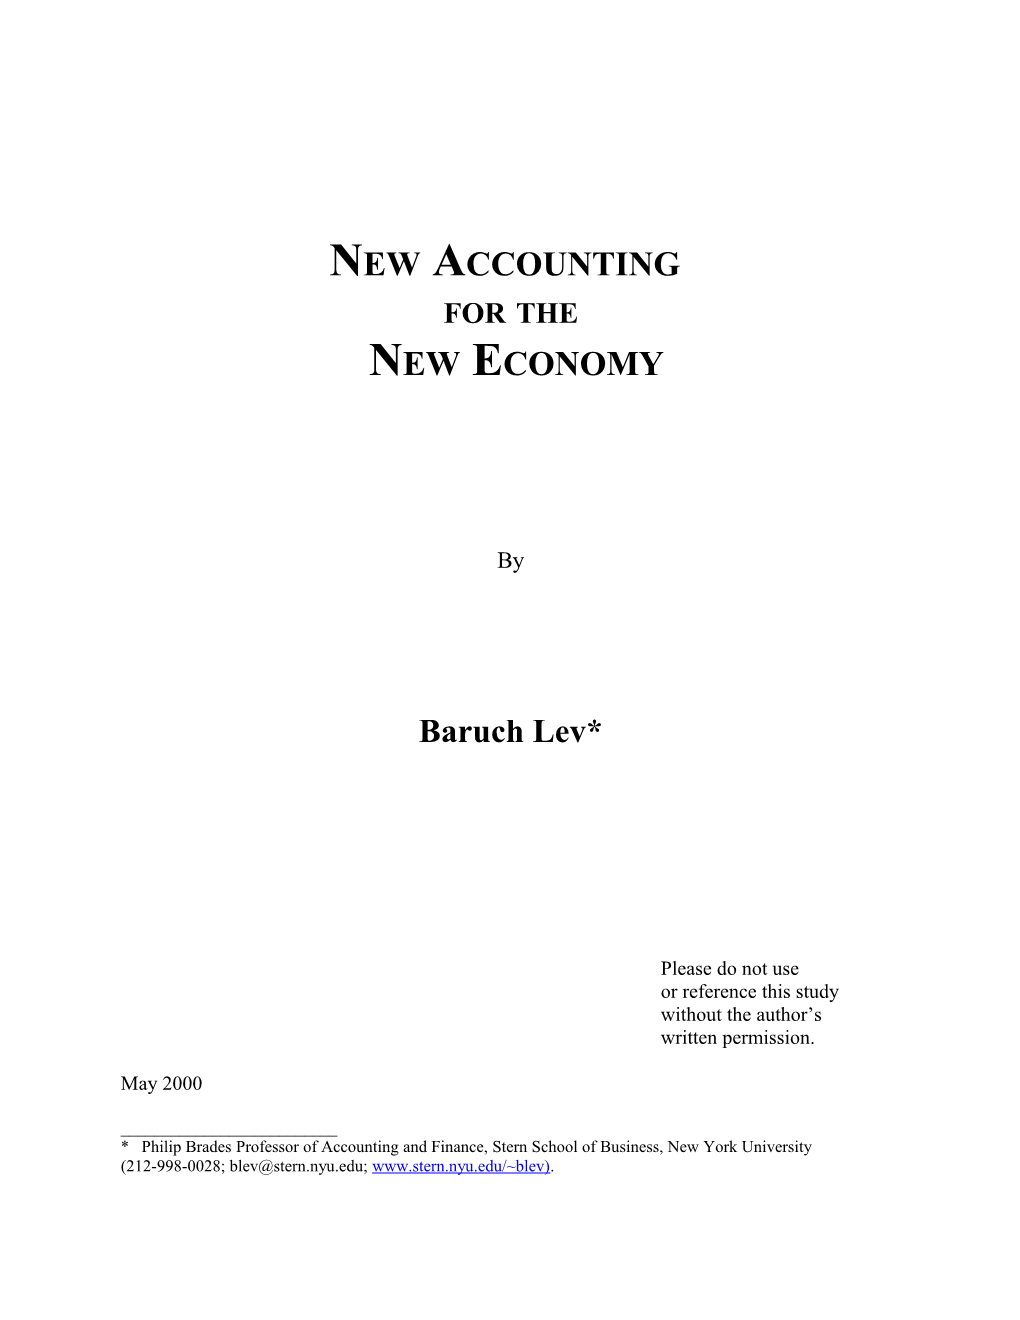 New Accounting for the New Economy